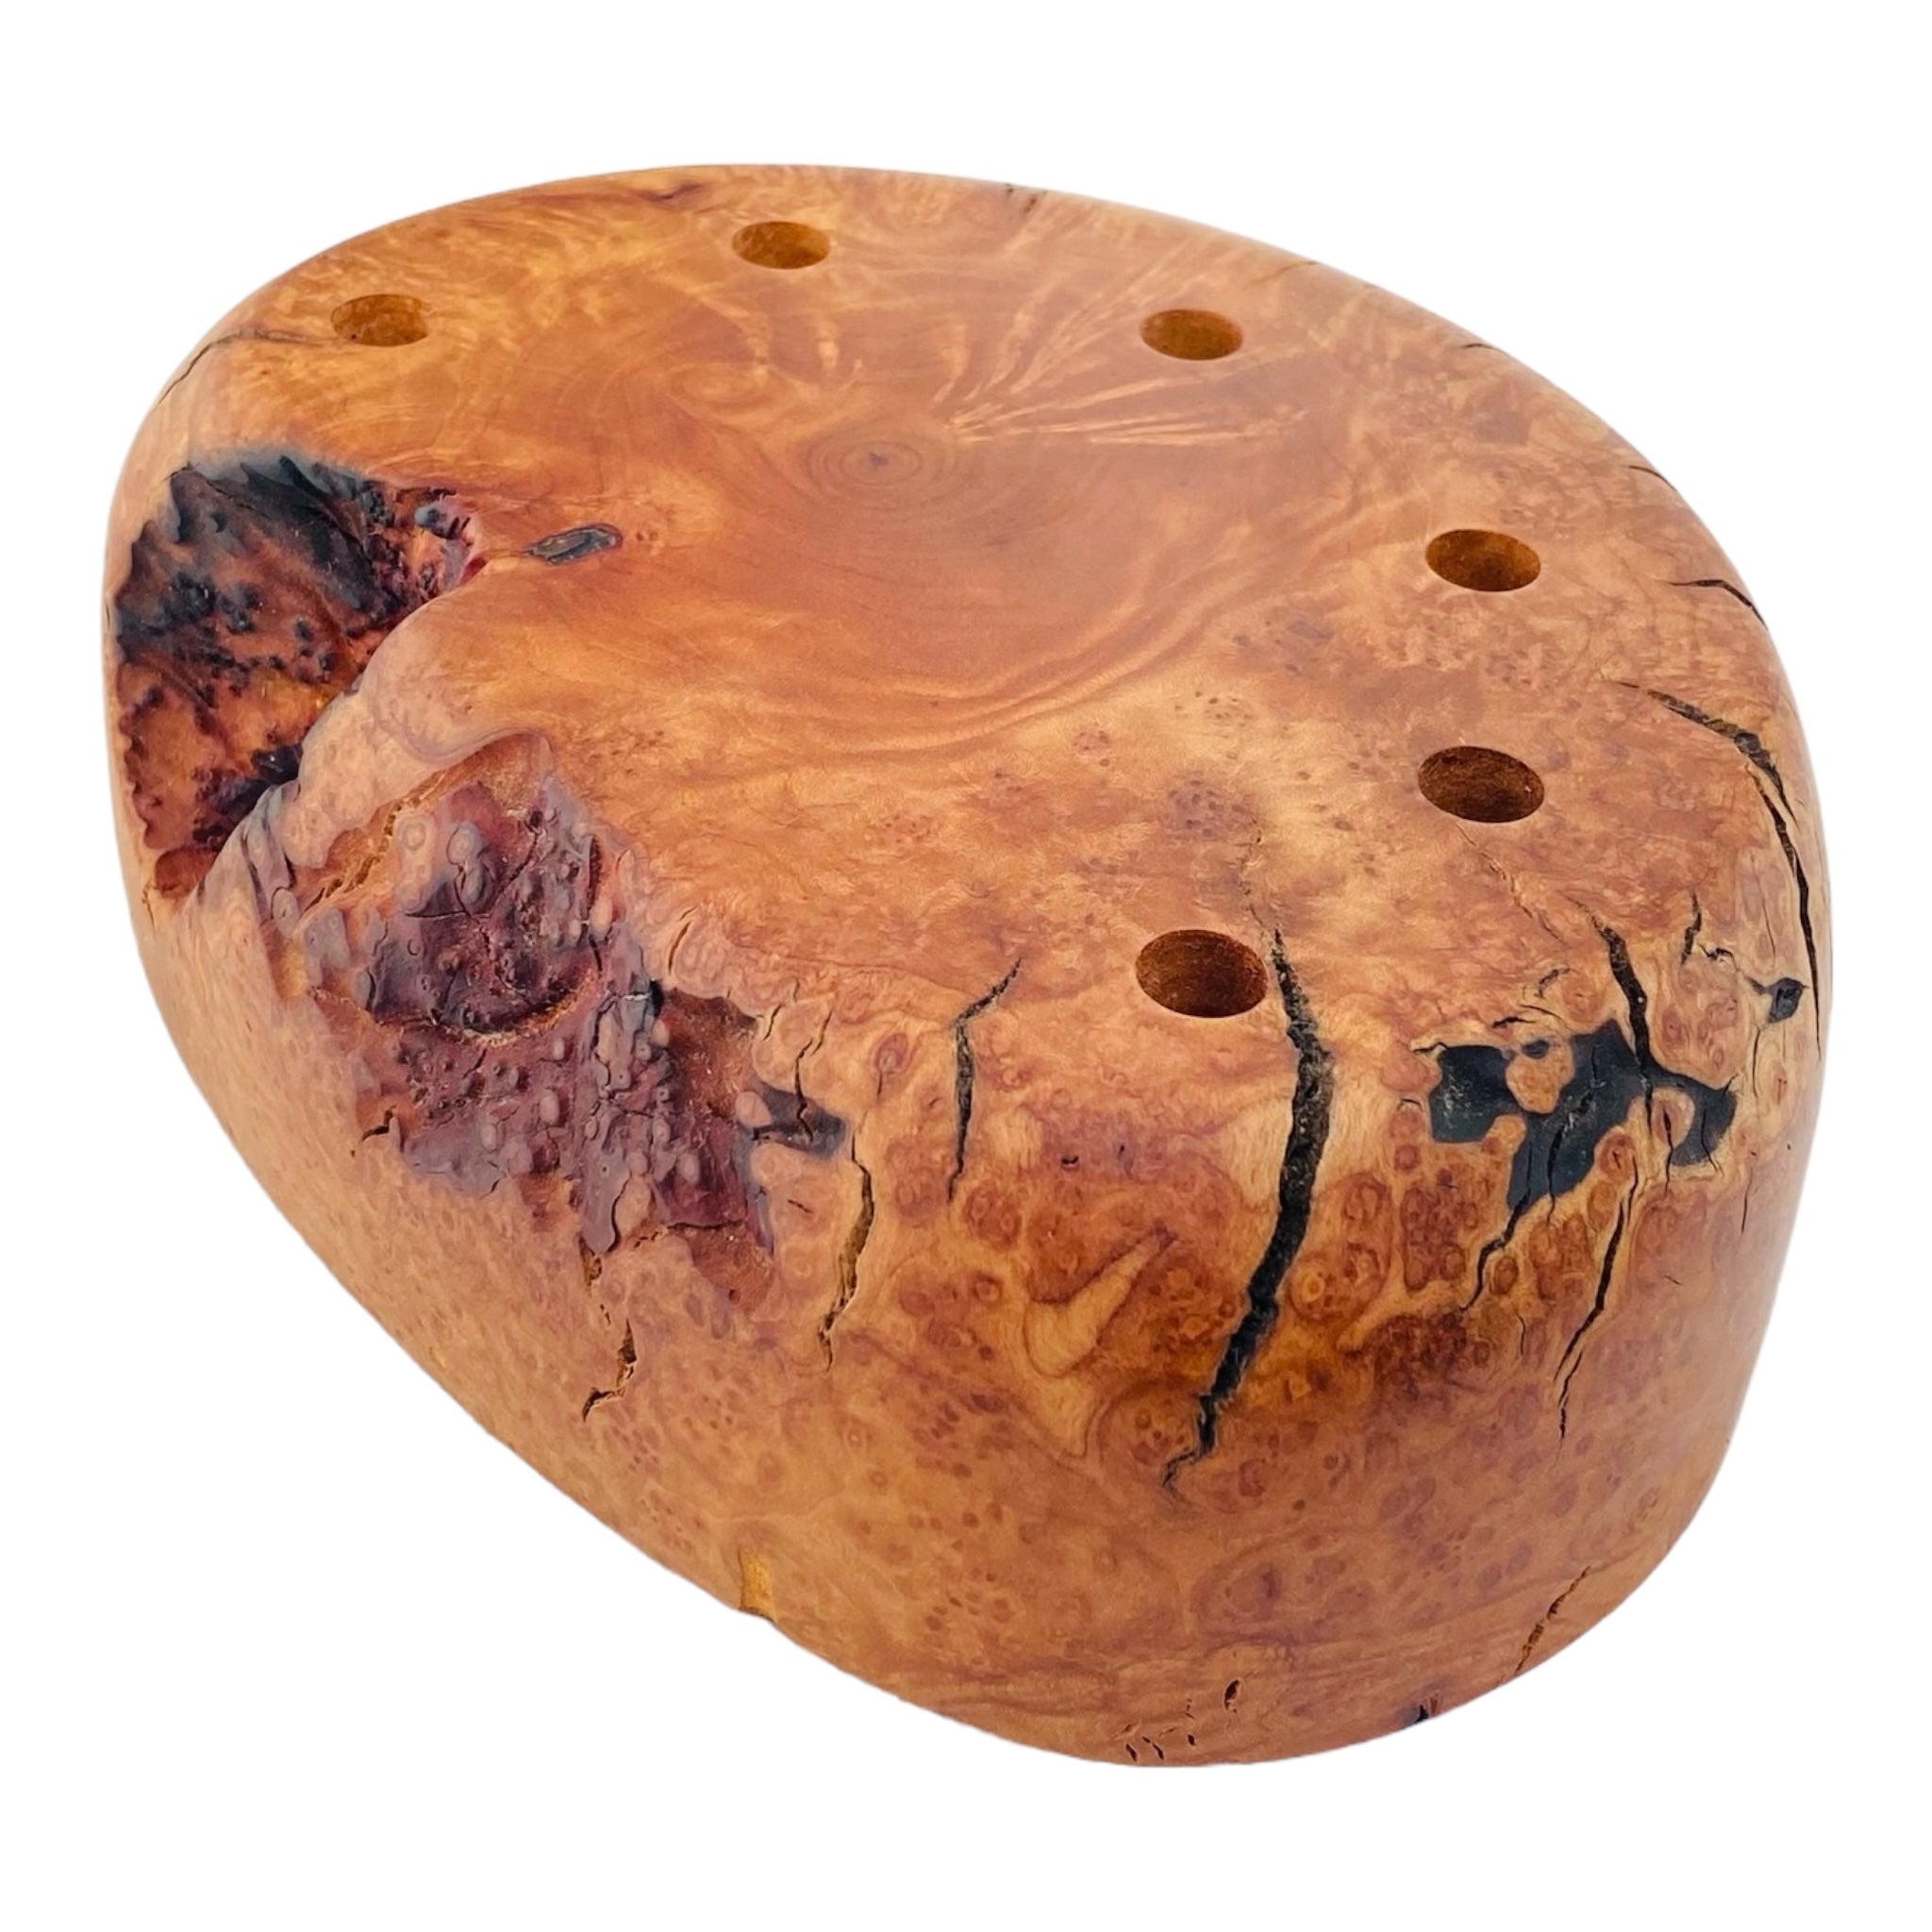 6 Hole Wood Display Stand Holder For 10mm Bong Bowl Pieces Or Quartz Bangers - Wild Fire Charred Manzanita Burl